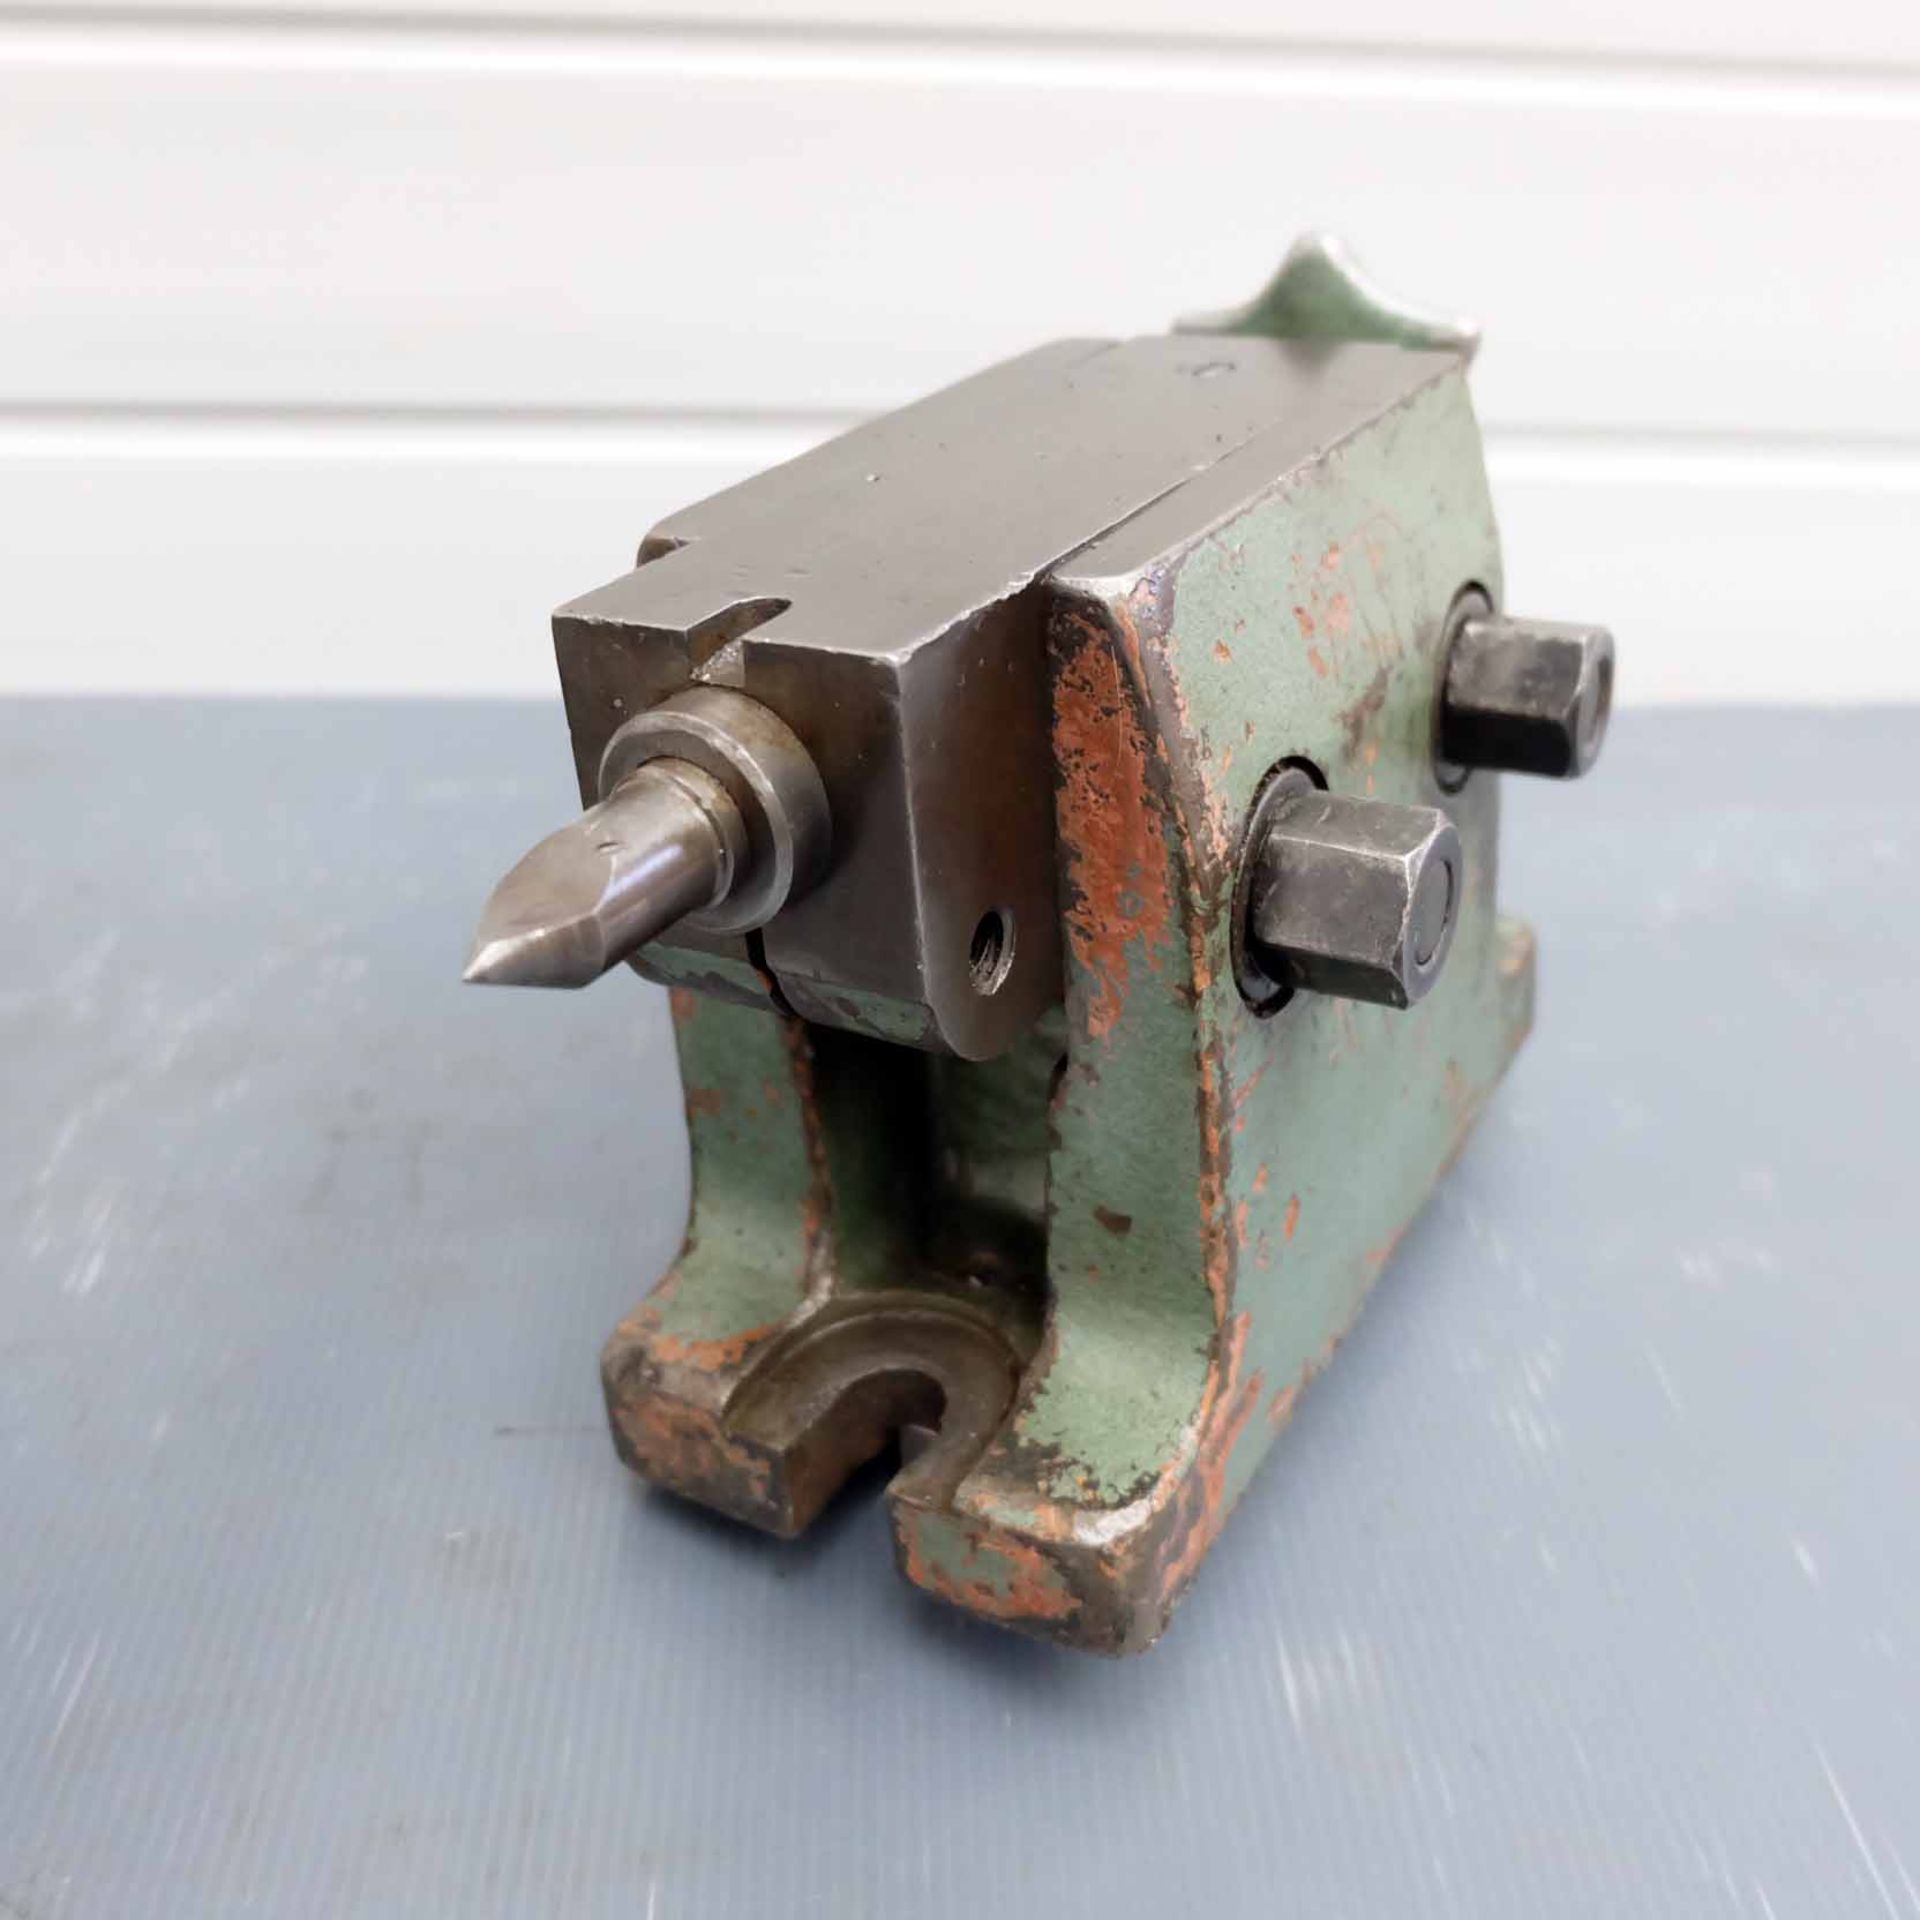 Vertical / Horizontal Indexing Workhead. With 6" 3 Jaw Chuck. Tailstock. - Image 7 of 11